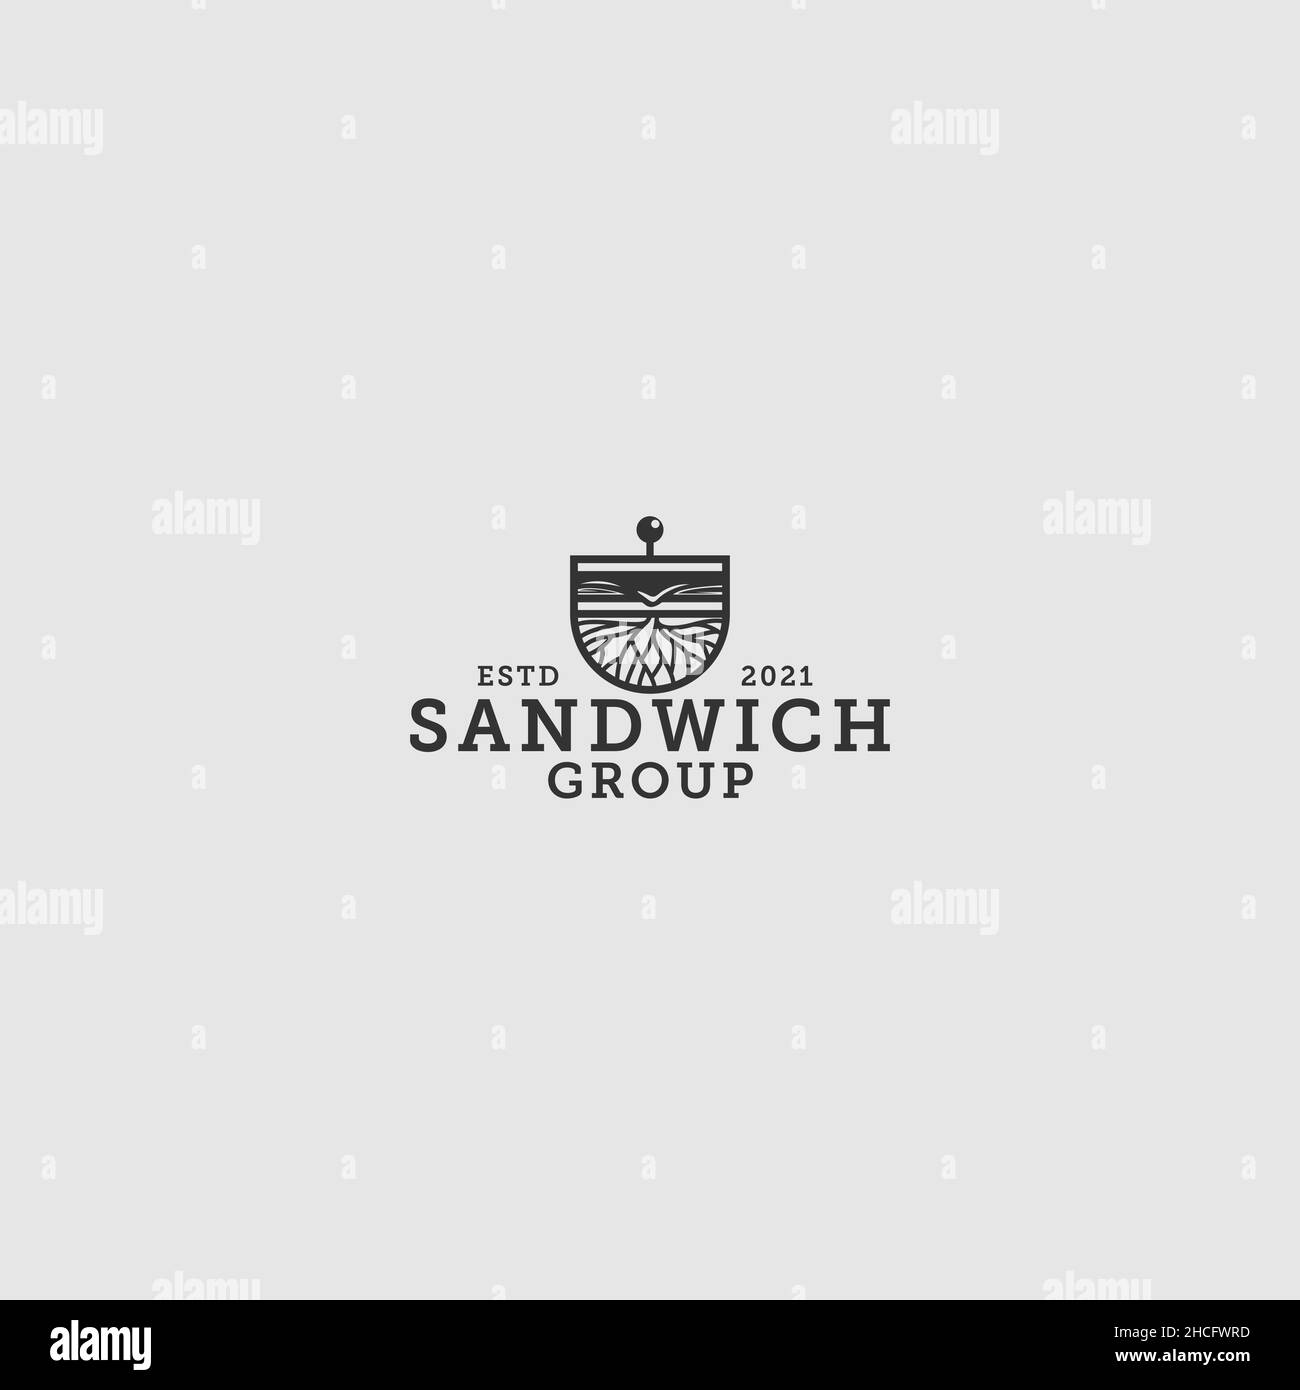 Club sandwich Black and White Stock Photos & Images - Alamy